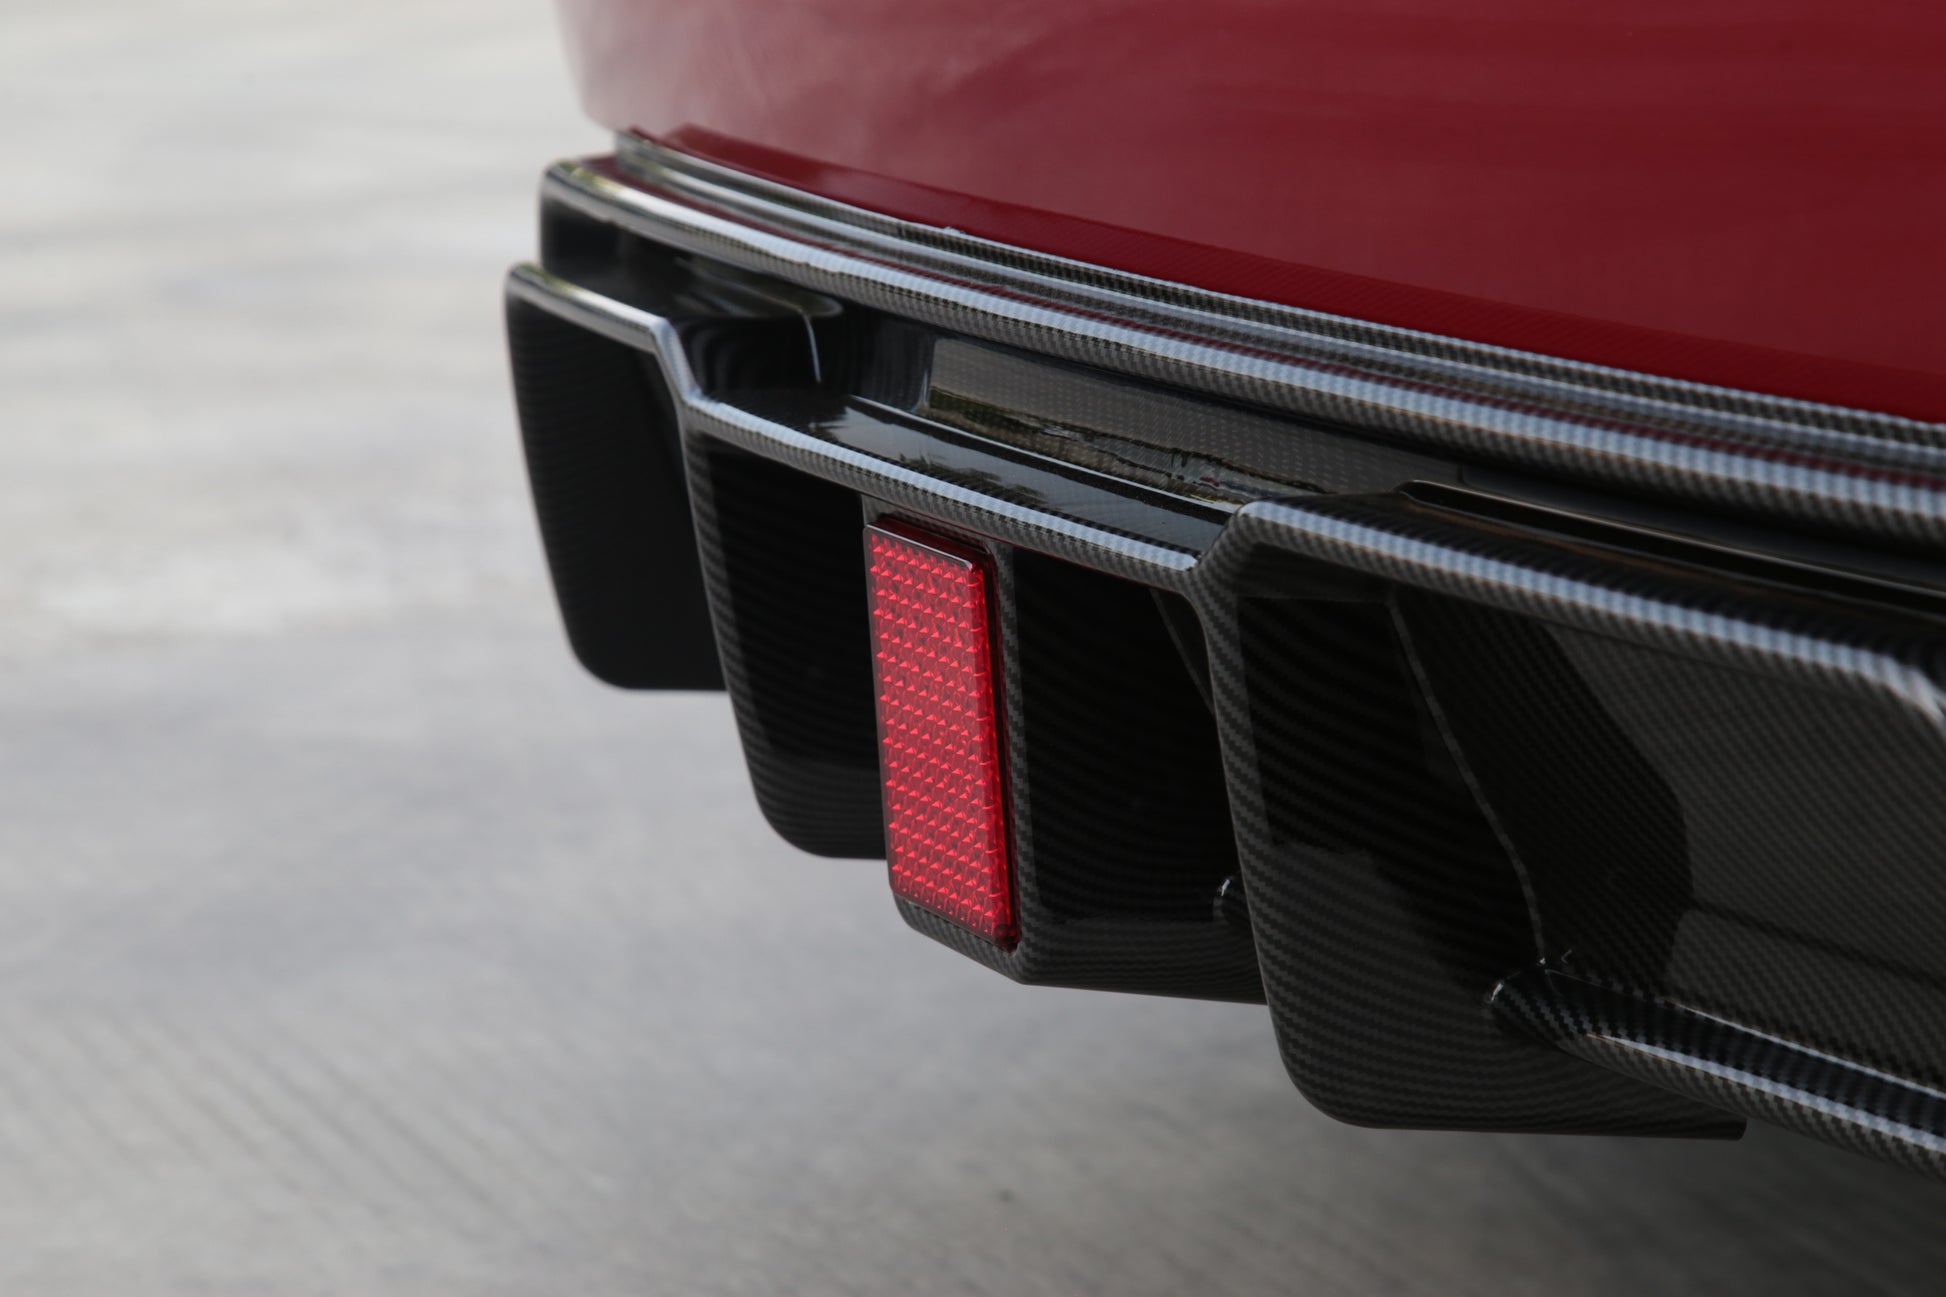 Model 3: Sports Rear Bumper Diffuser and Splitters with Brake Lights (3 PCs)